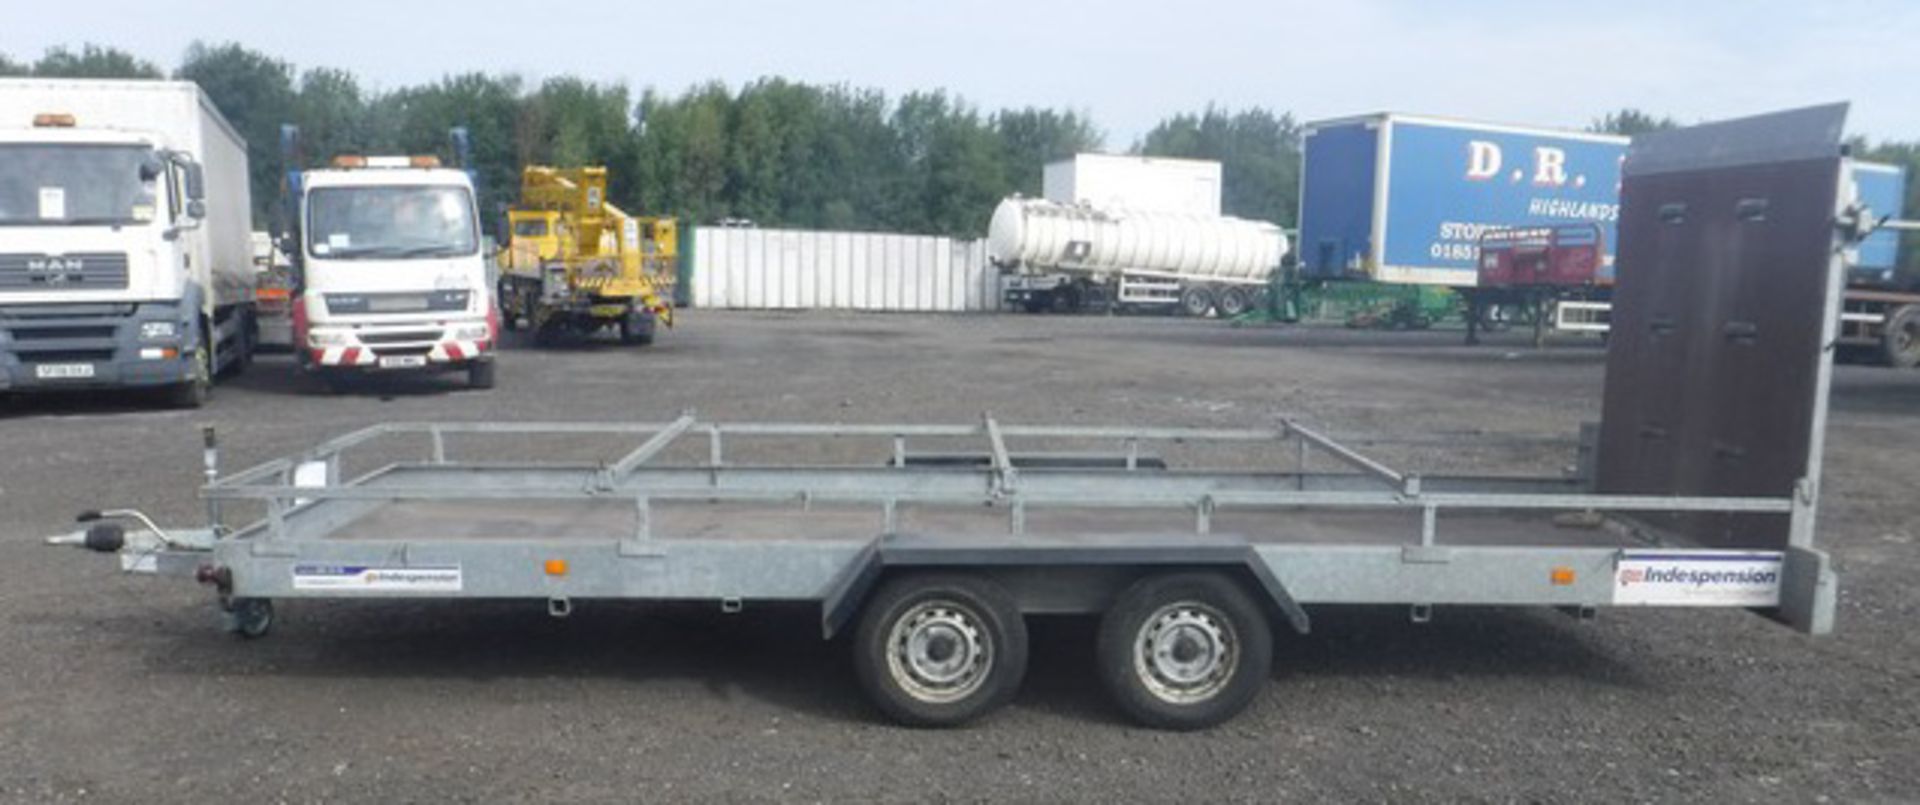 2003 INDESPENSION 18' X 6' twin axle trailer c/w 5' ramp. Max gross weight 2000kgs. VIN 076764. Asse - Image 9 of 10